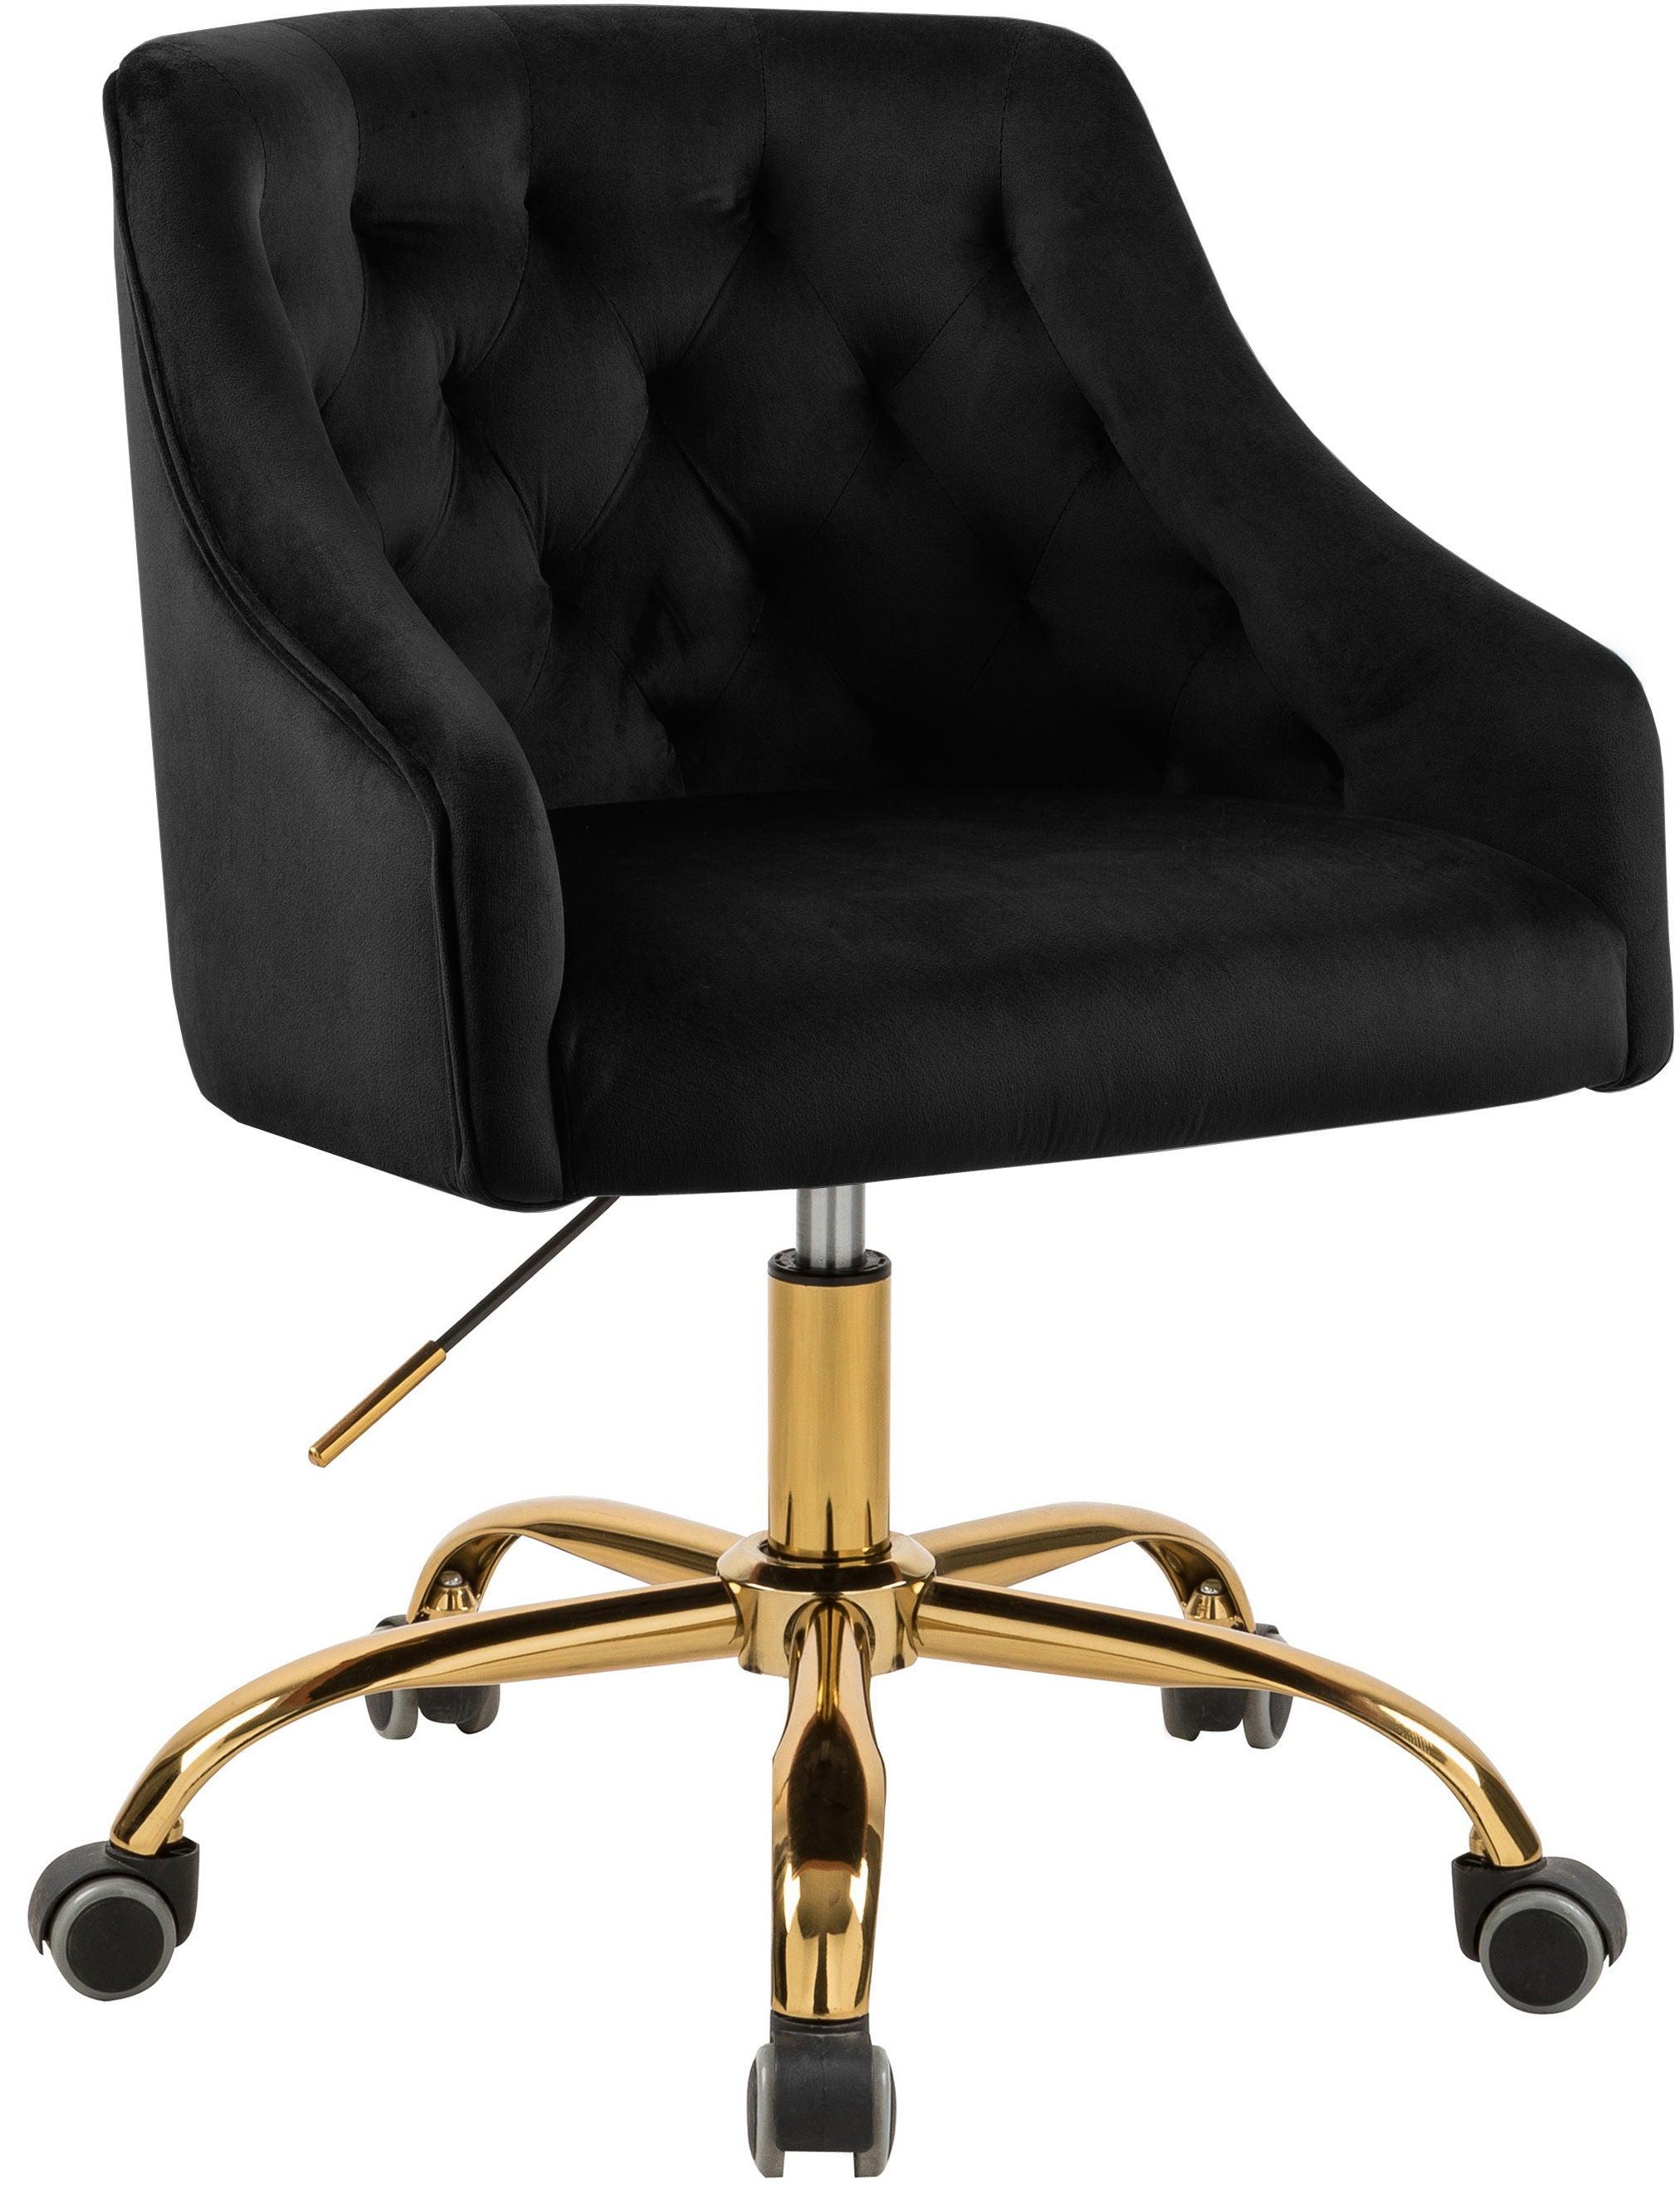 Meridian Furniture - Arden - Office Chair with Gold Legs - 5th Avenue Furniture